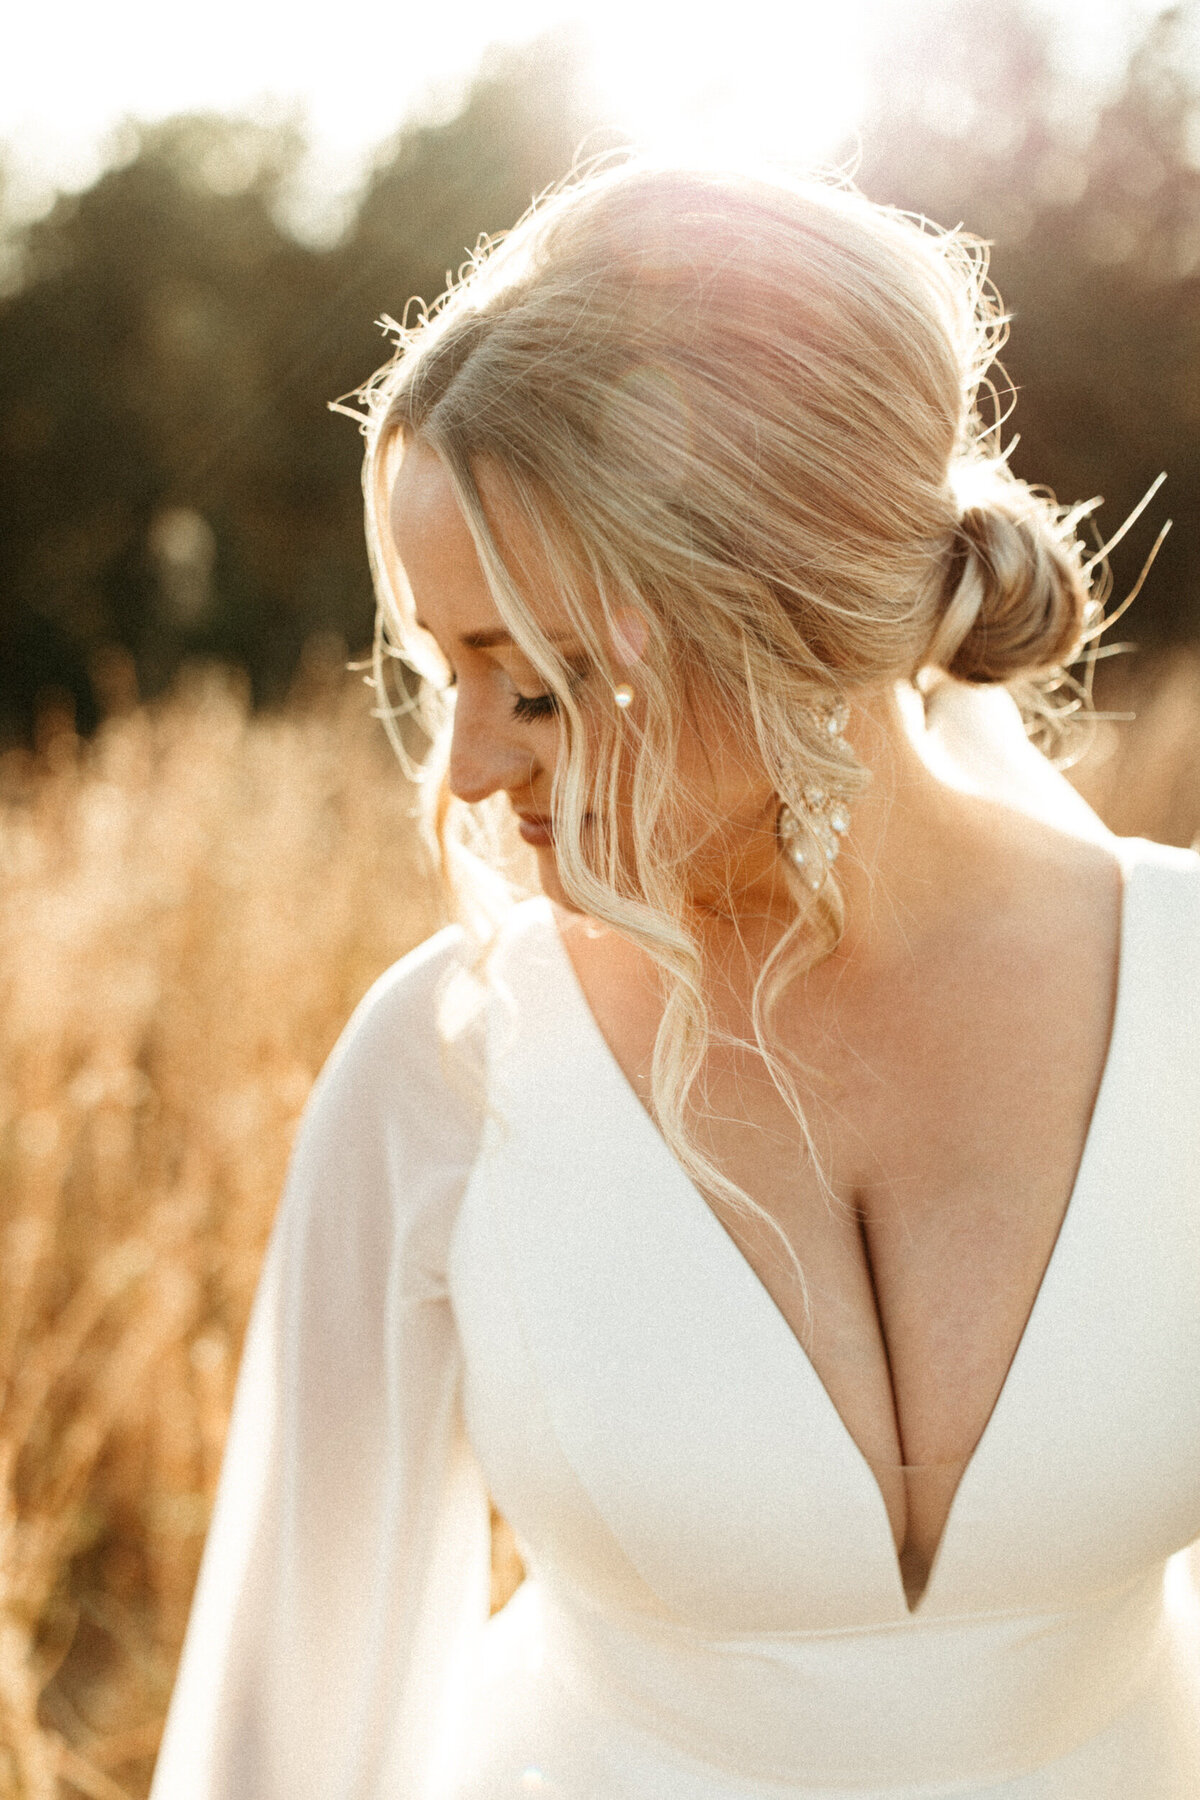 Elegant bride with messy updo and a wedding dress with long sleeves looking down over her shoulder in a field with the sun behind her